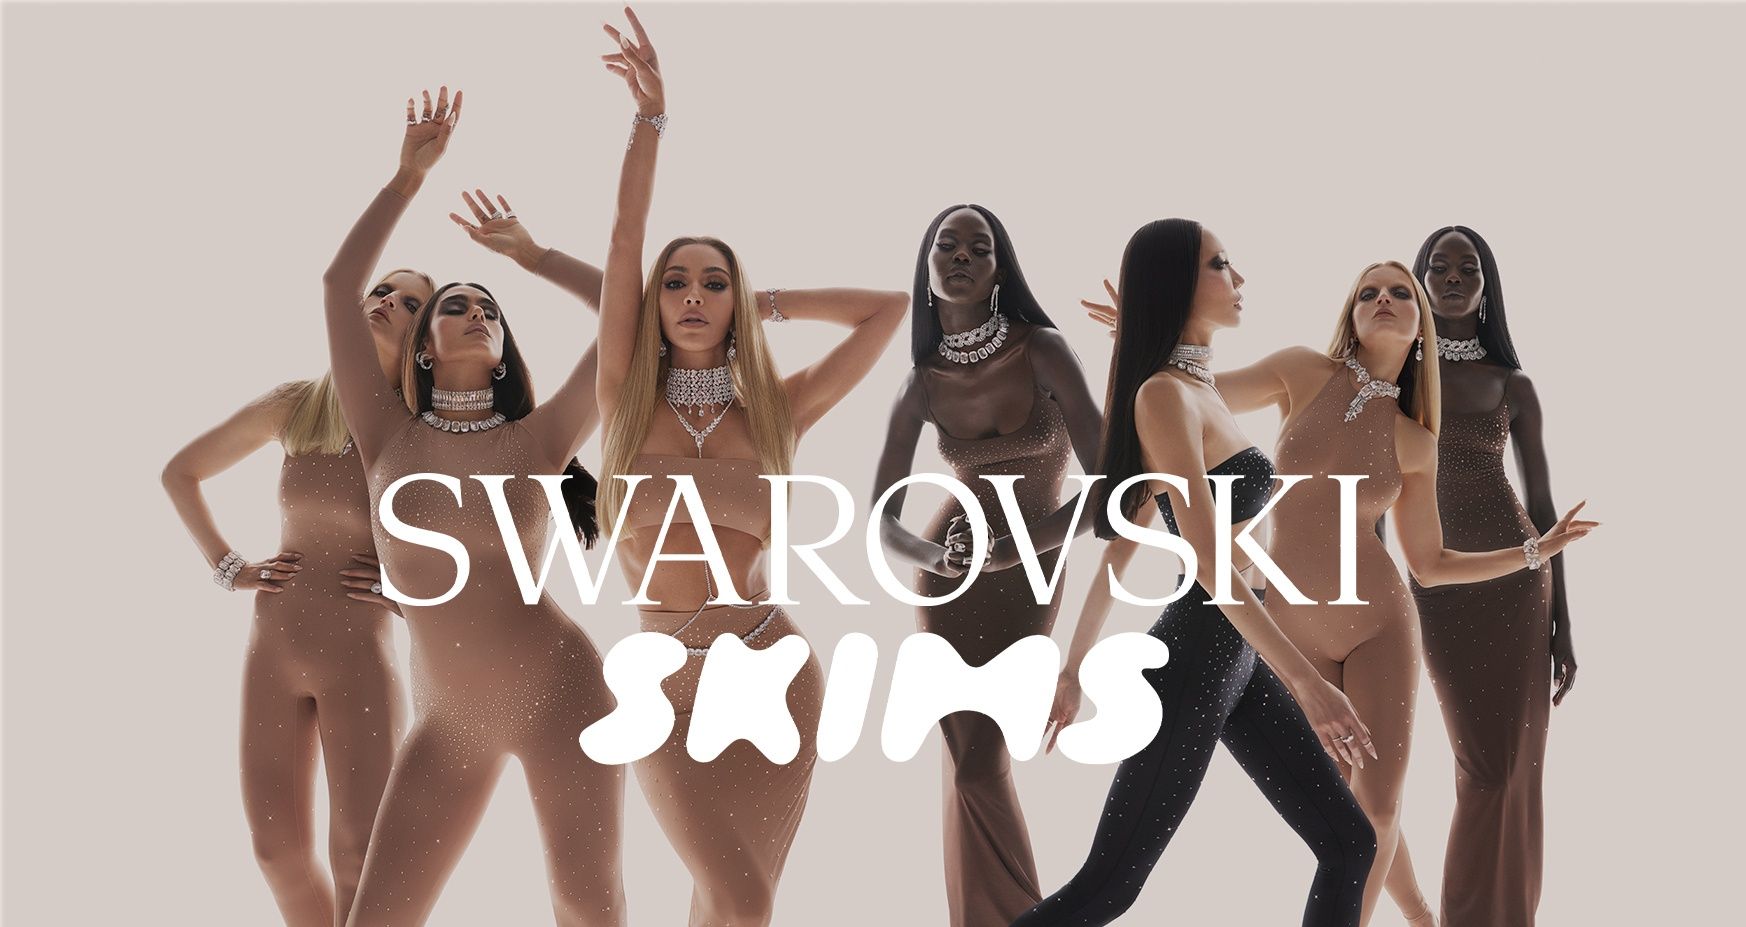 What to expect from the SKIMS x Swarovski collaboration